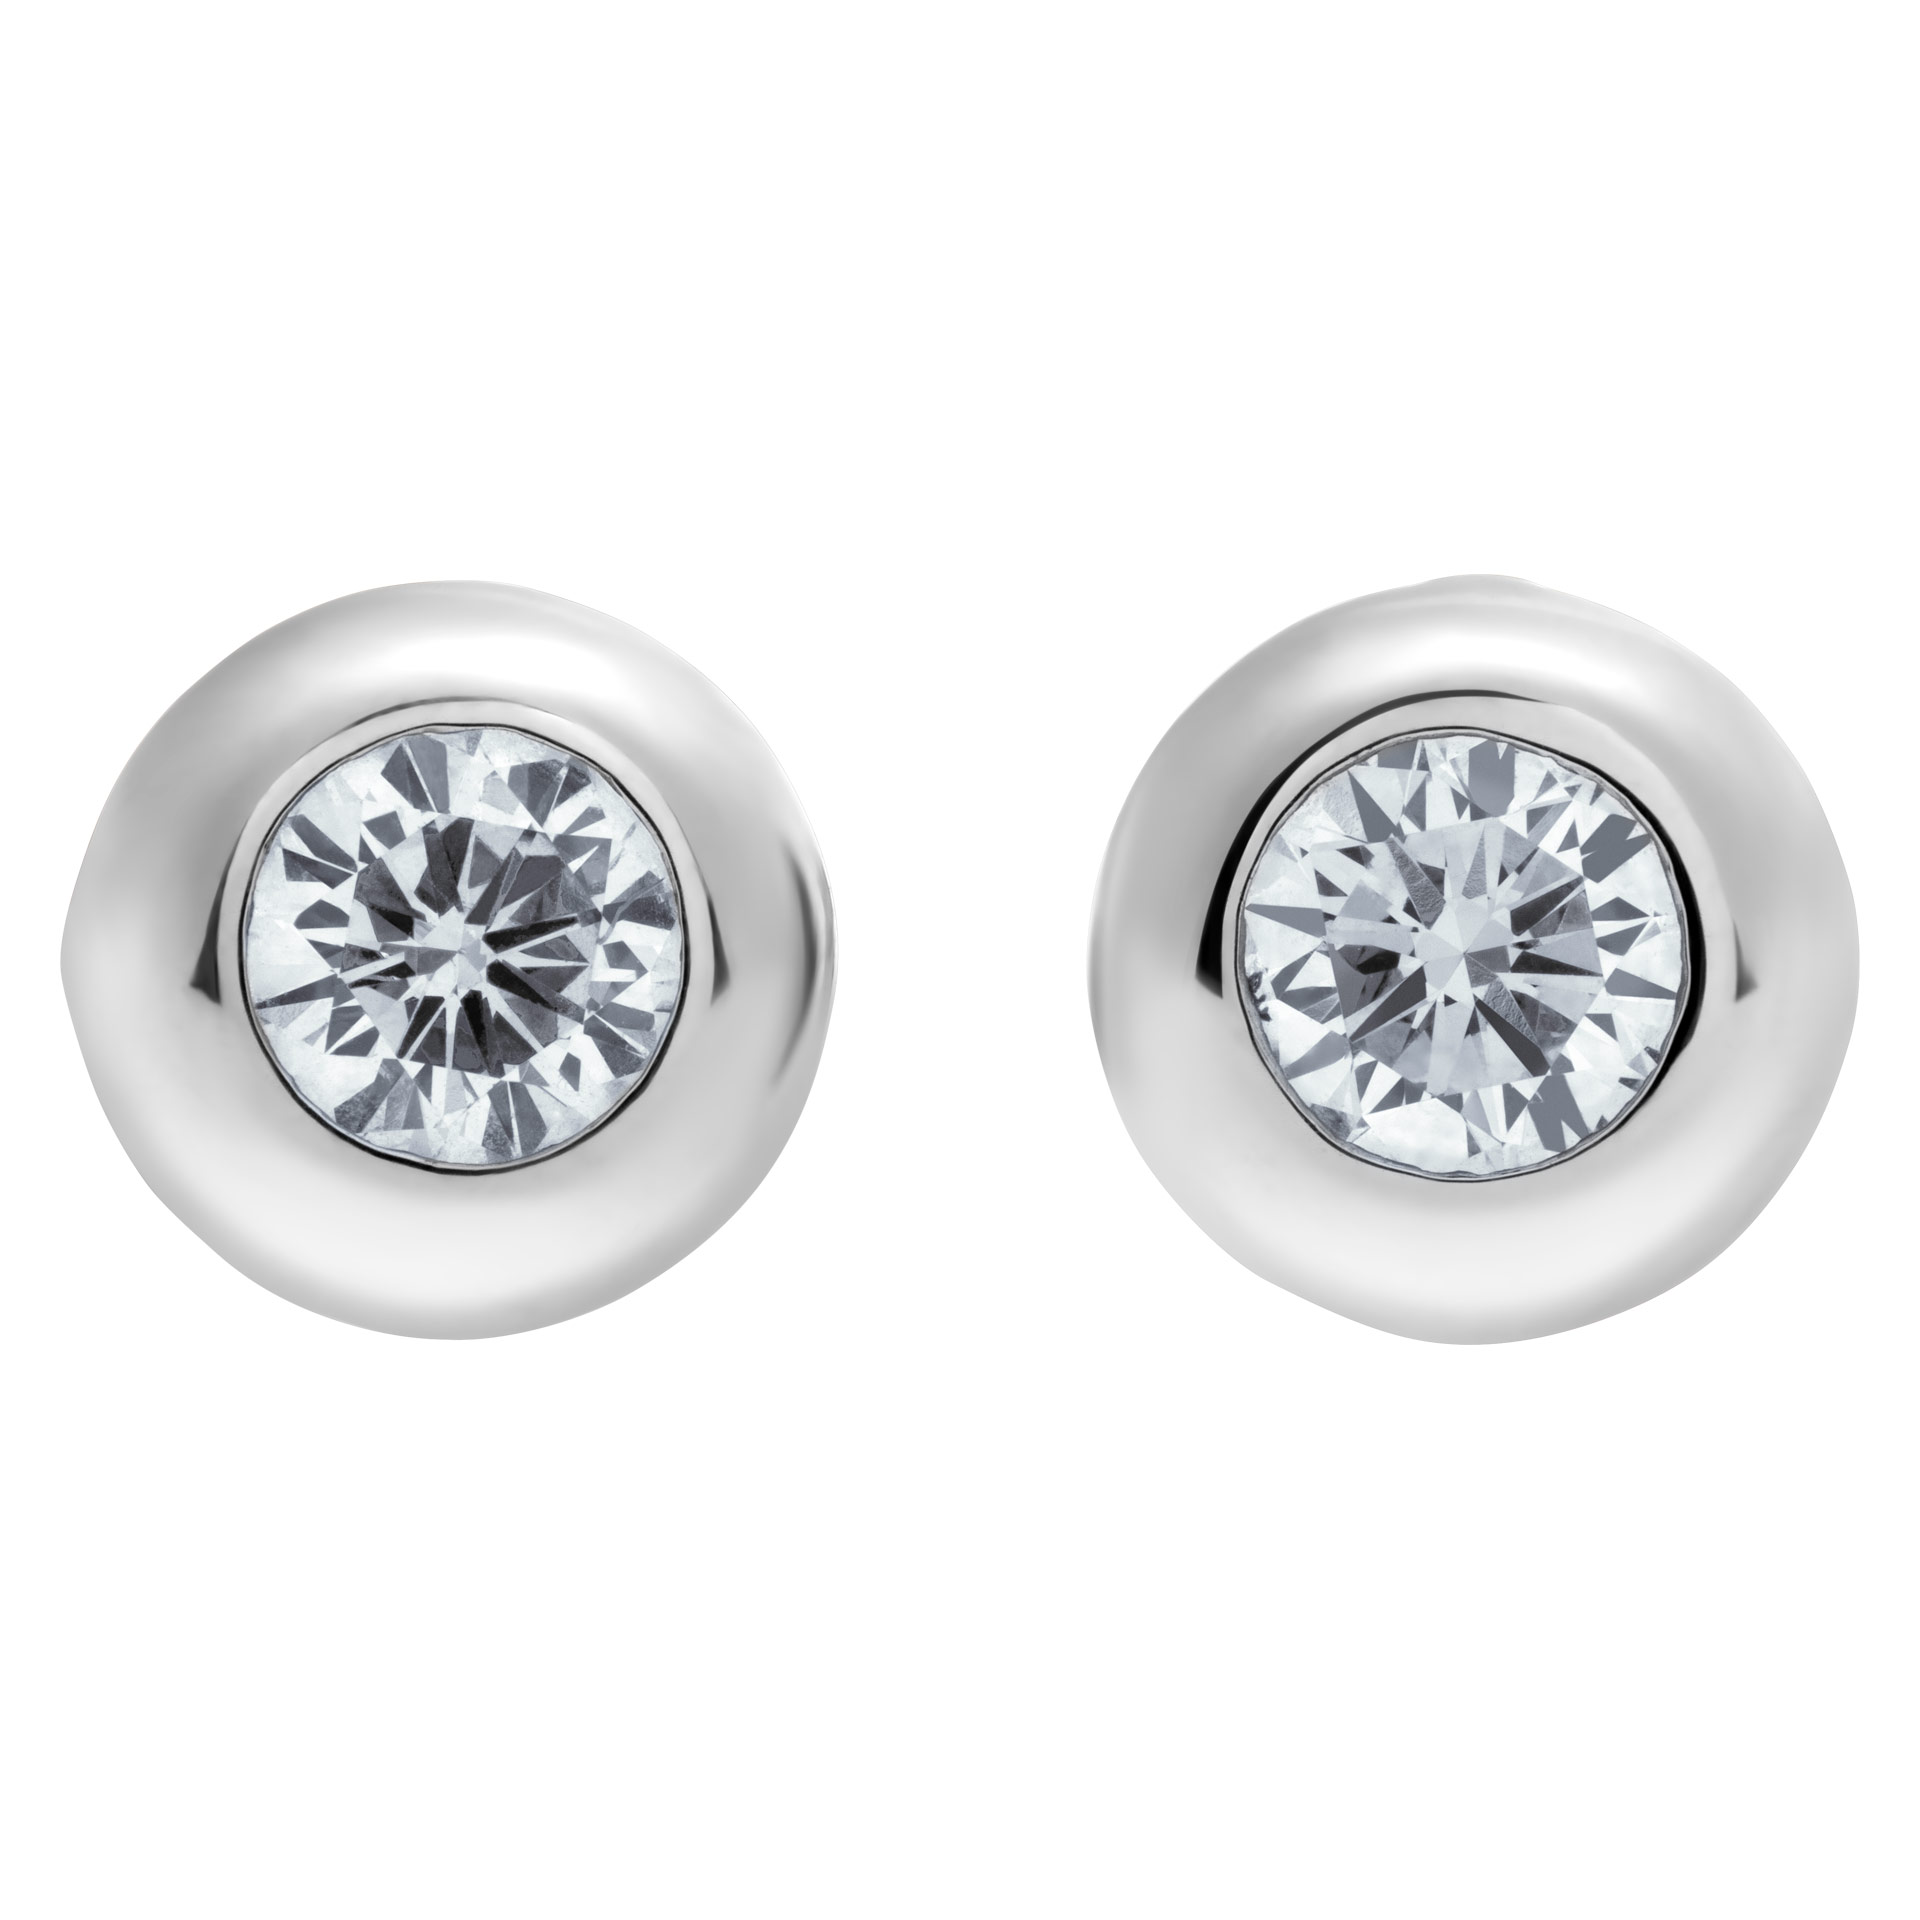 Bezel set diamond stud earrings in 18k white gold. Round brilliant cut diamonds, total approx.weight: 1.00 carat image 1